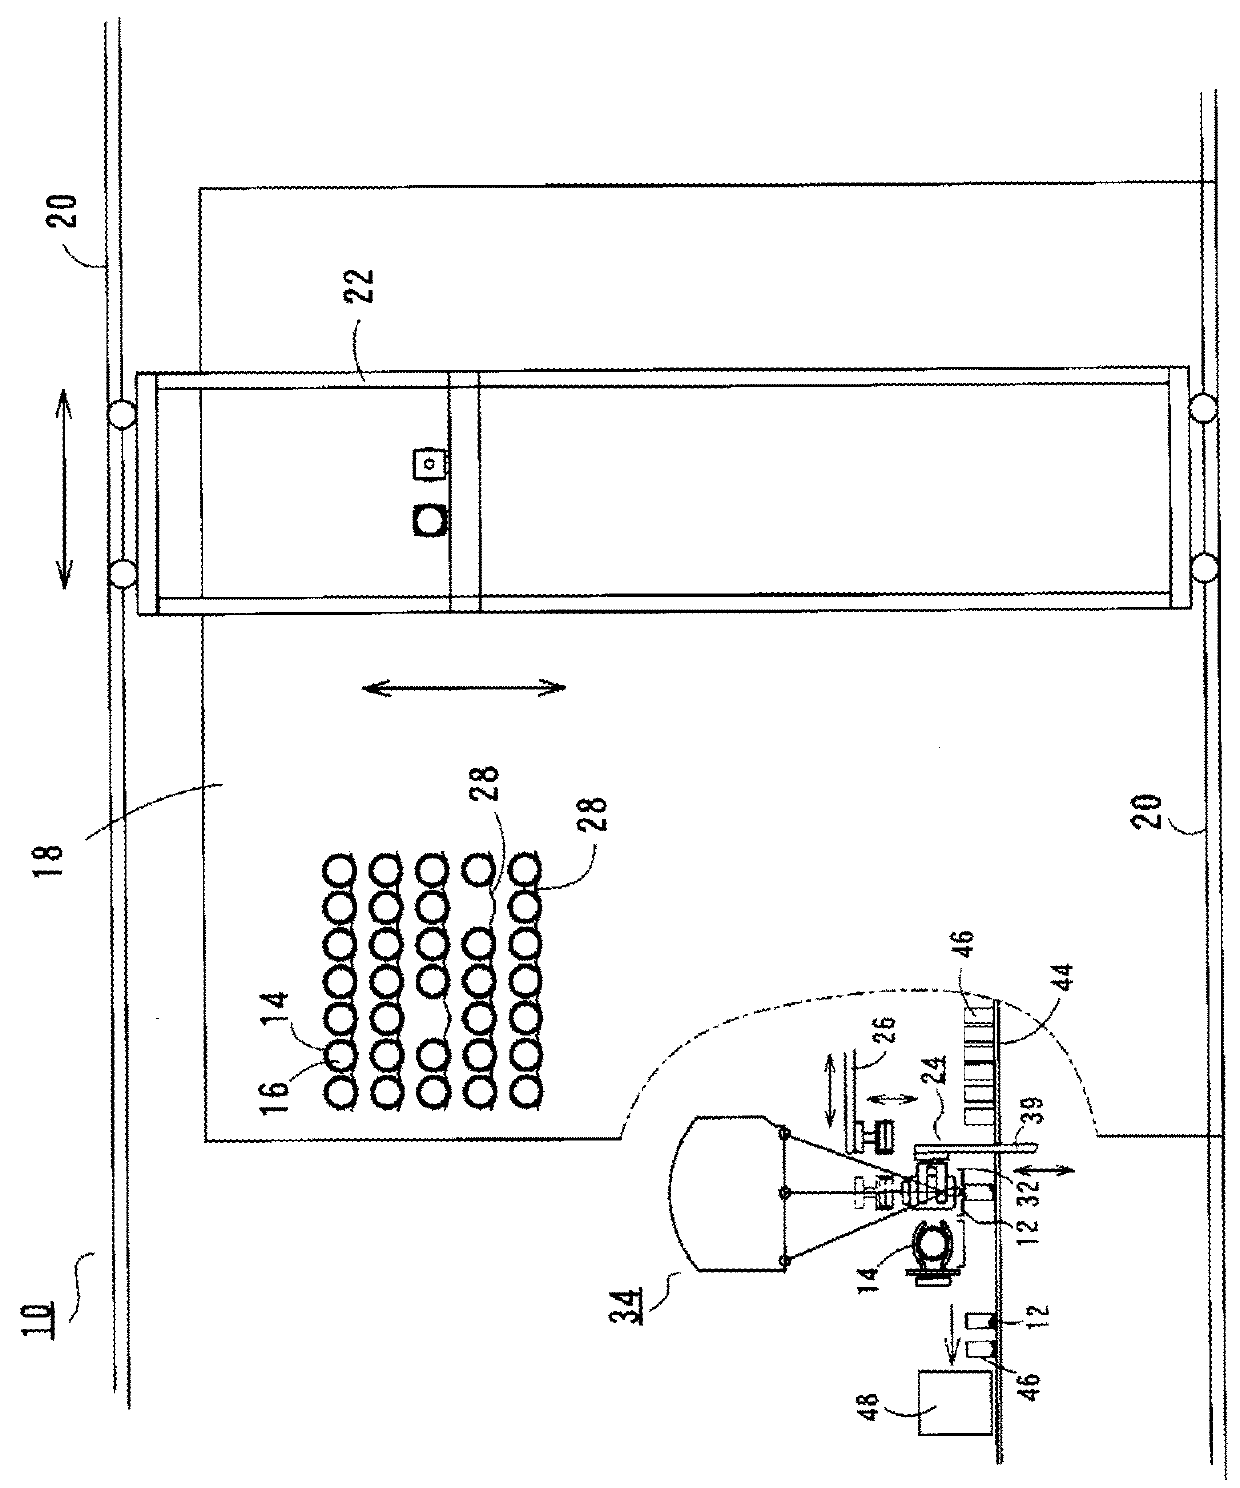 Automatic drug dispensing and picking system